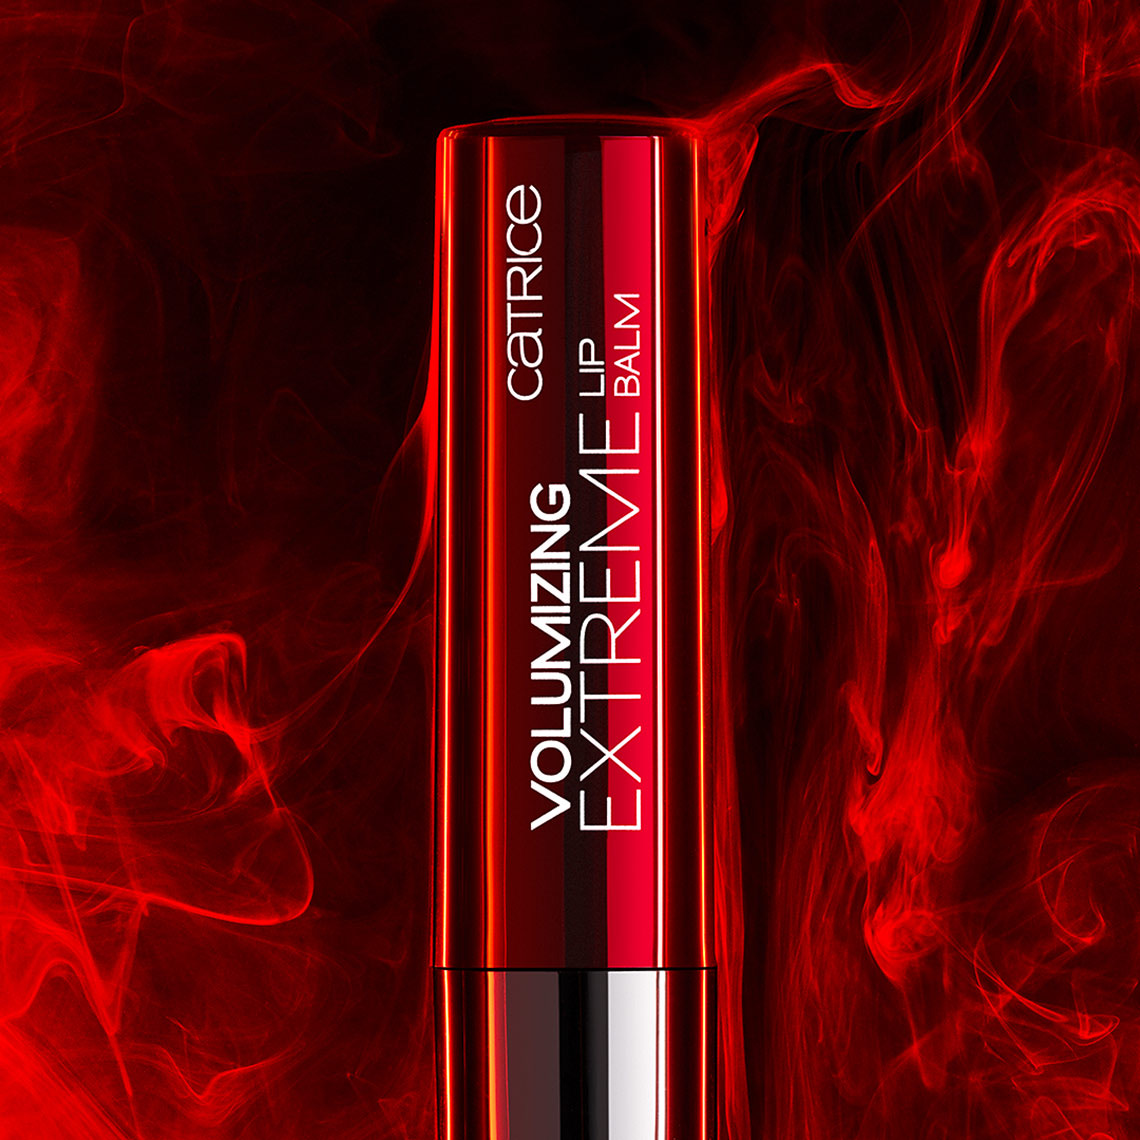 Cosmetic Smoke Explosion  for catrice cosmetics • Marc Wuchner • Cosmetic and Texture Photographer